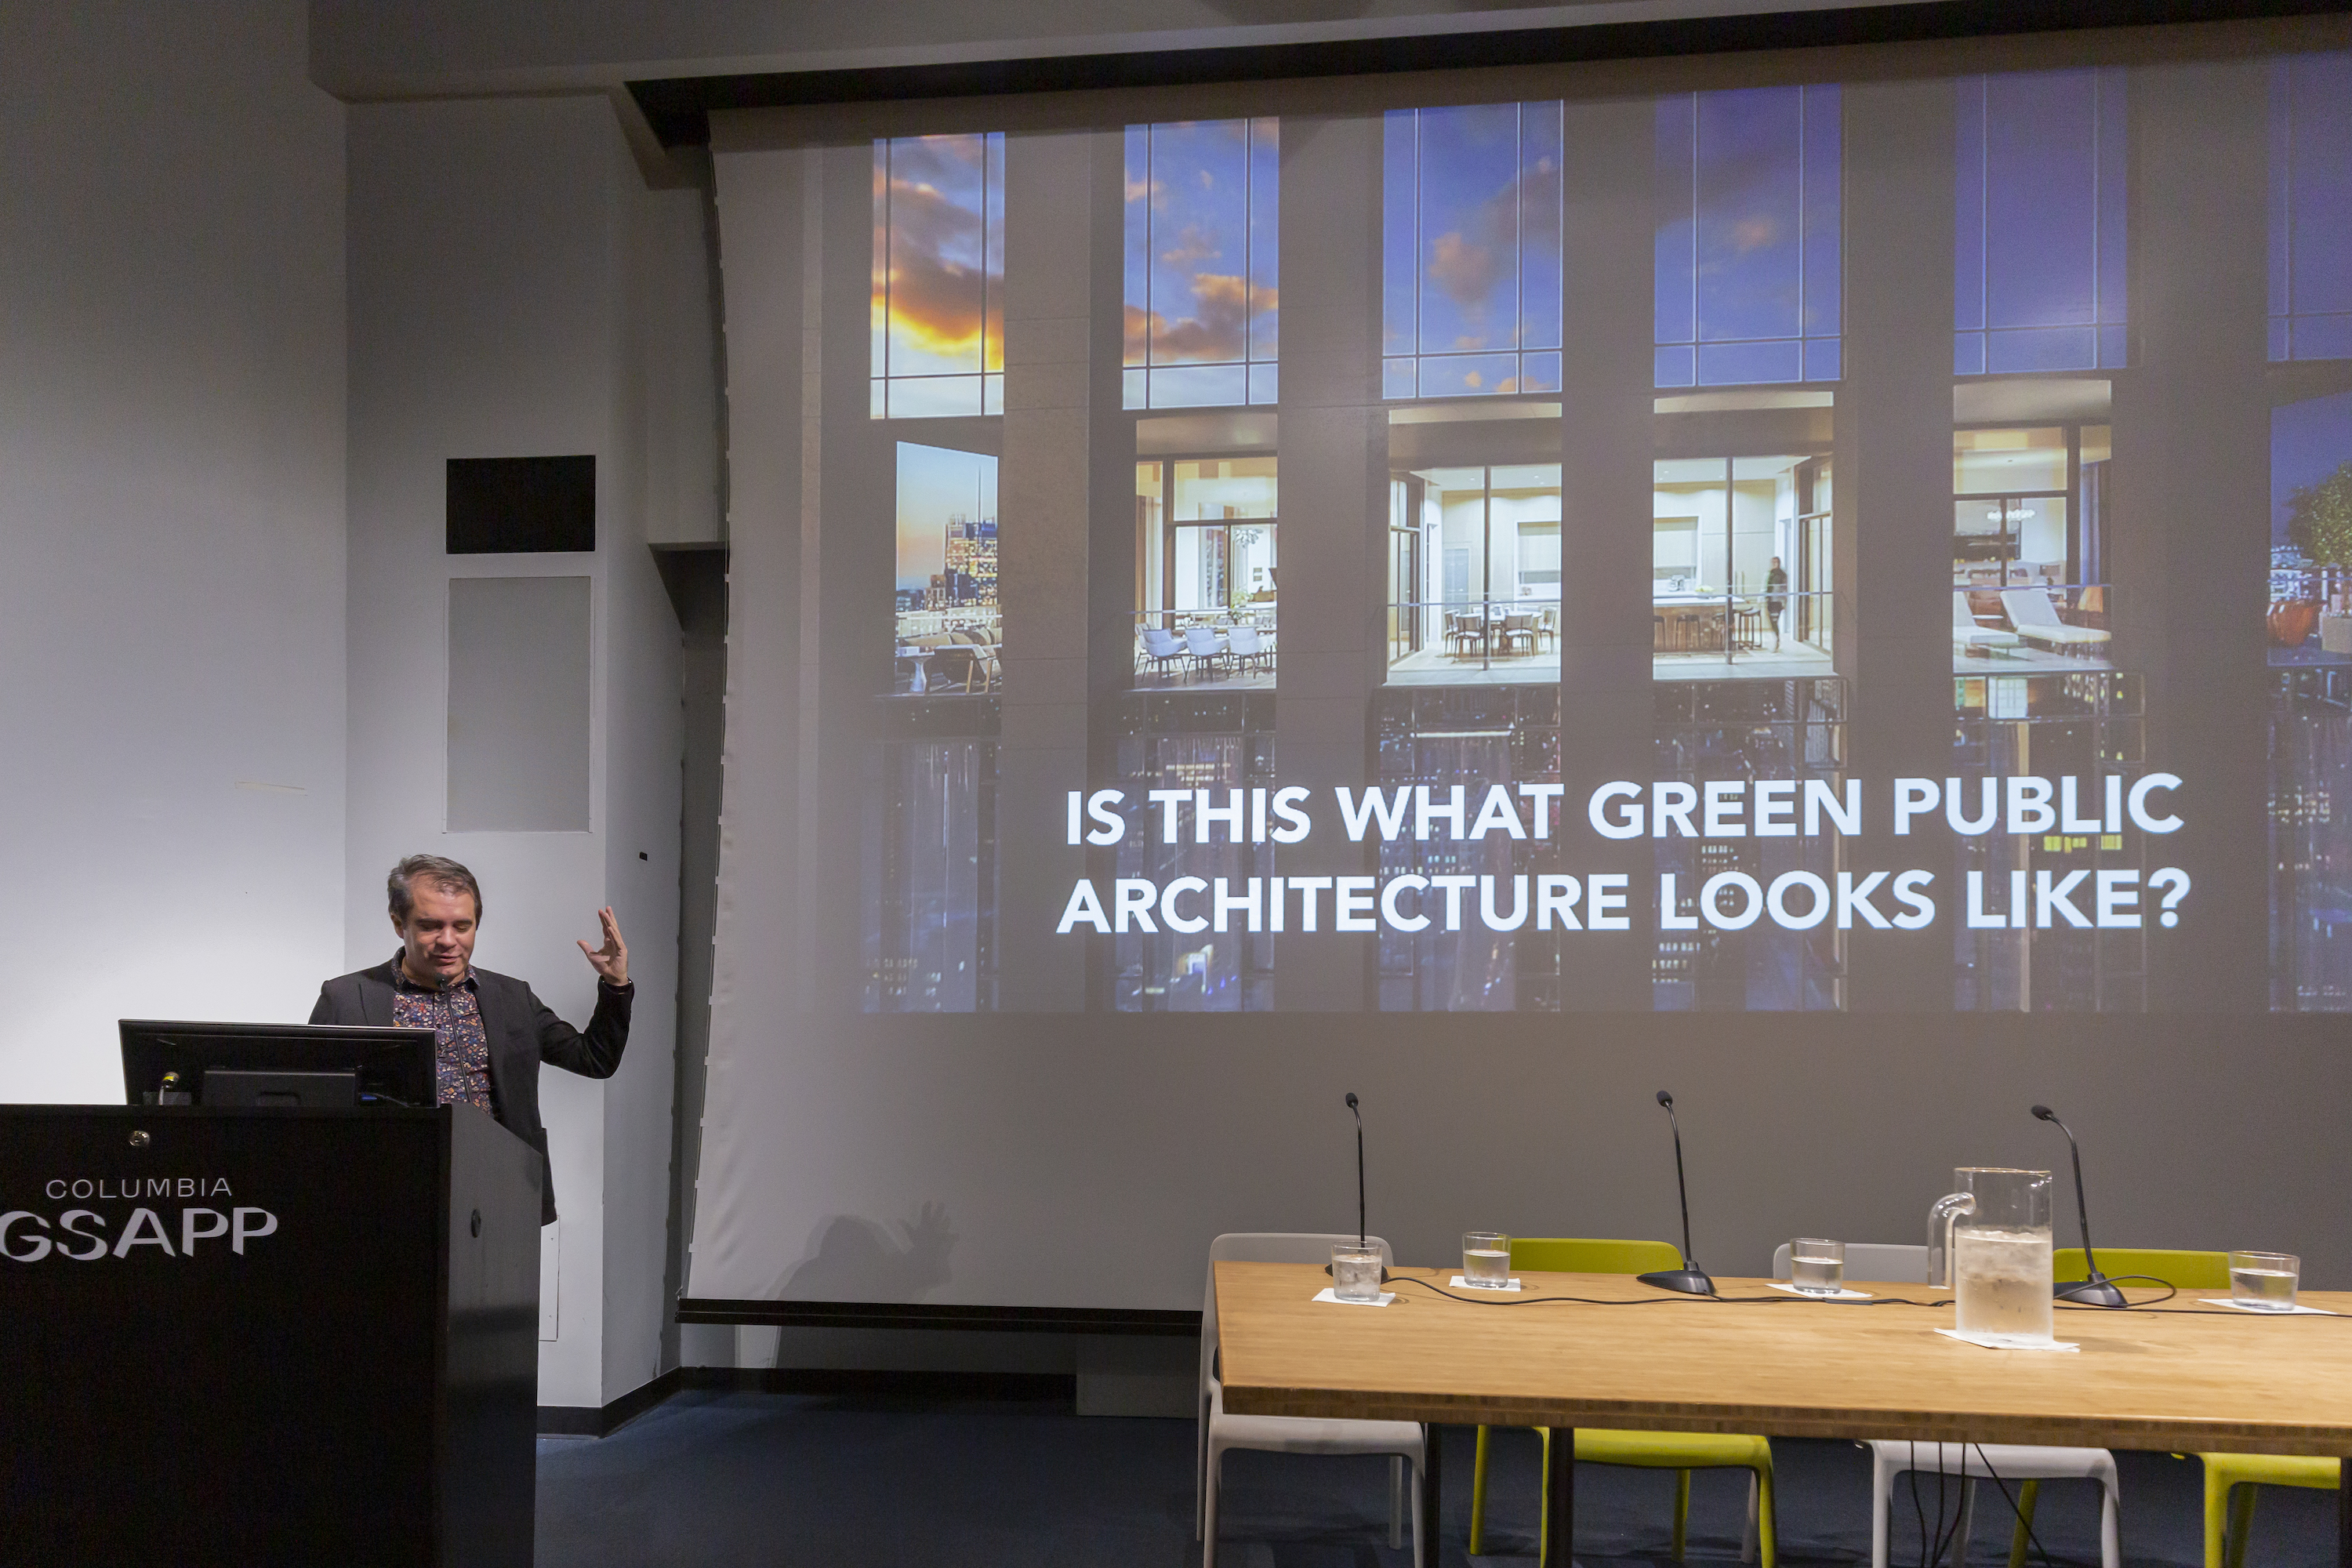 Andrés Jaque presenting at "Public Works for a Green New Deal." Jaque is seen standing behind a podium with his left arm raised. The slide on the auditorium screen reads "Is this what green public architecture looks like?"